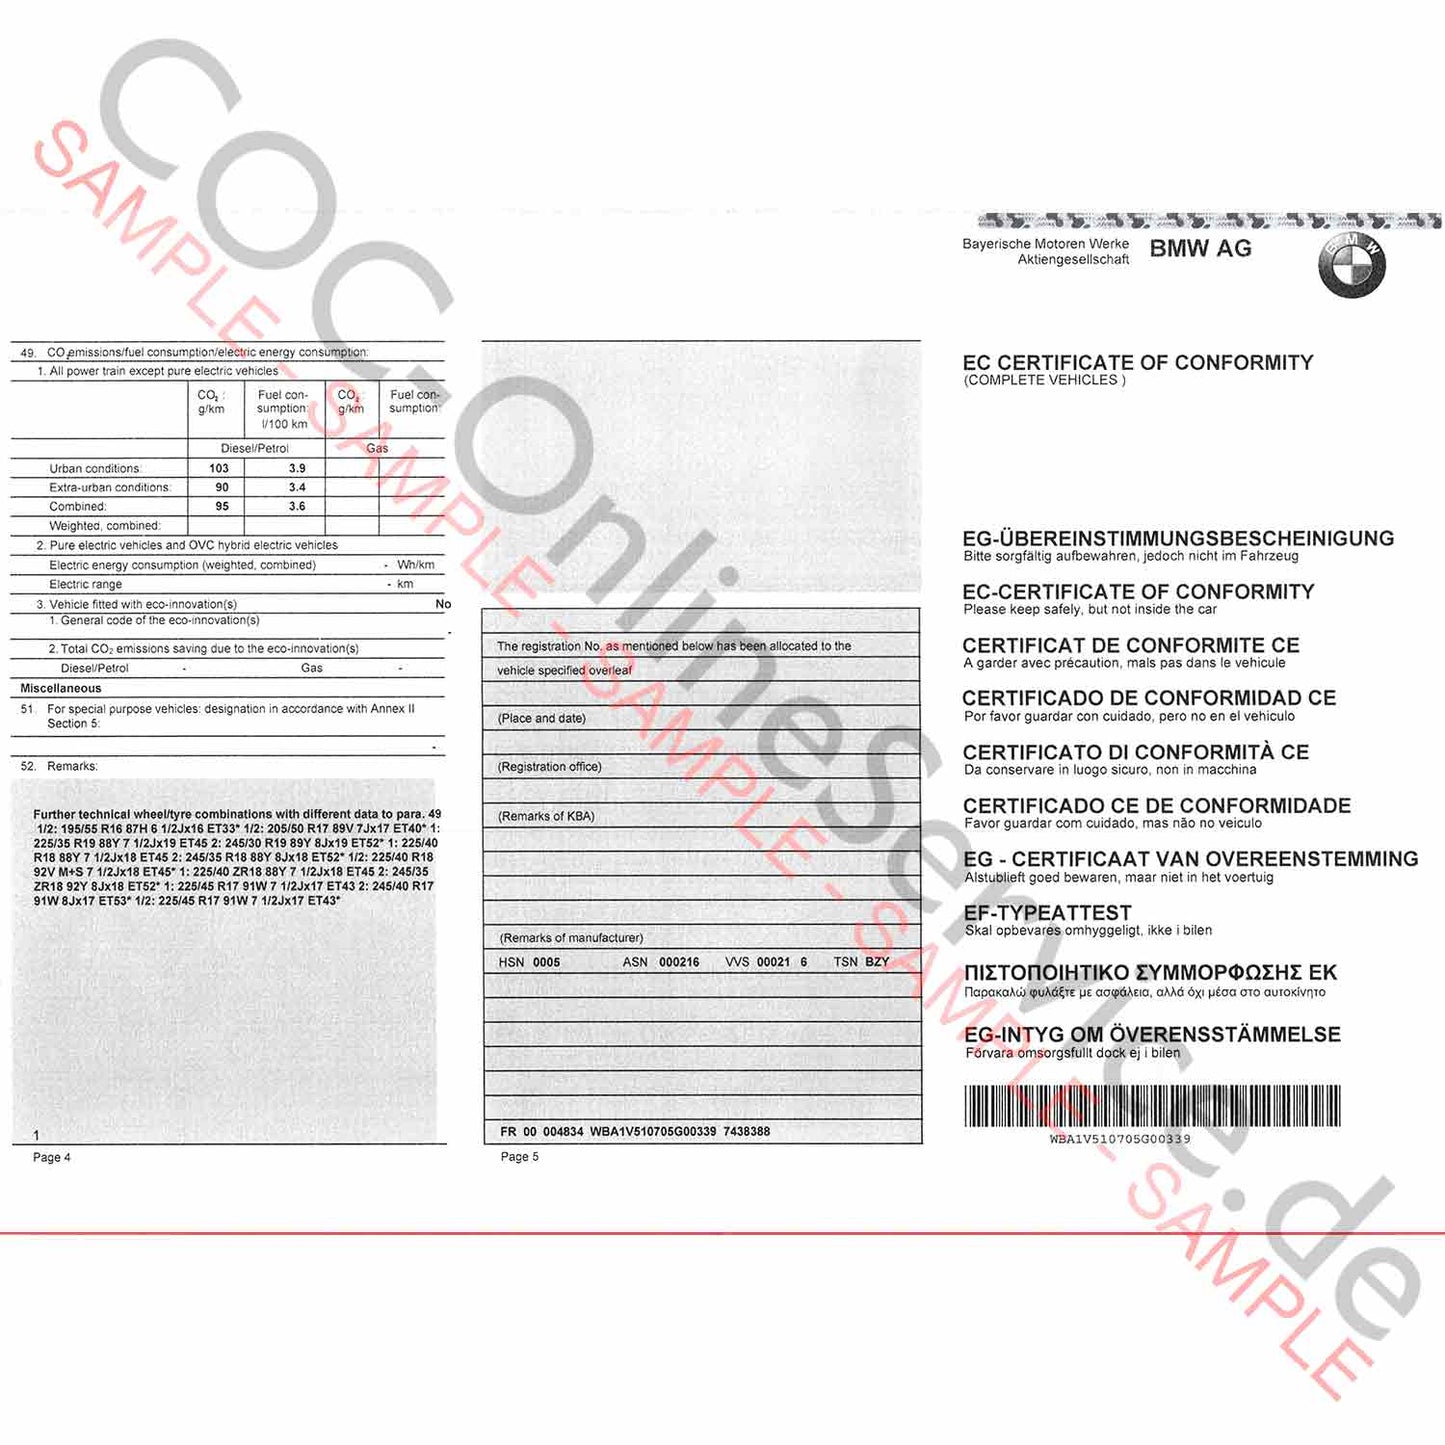 COC Document for BMW (Certificate of Conformity)